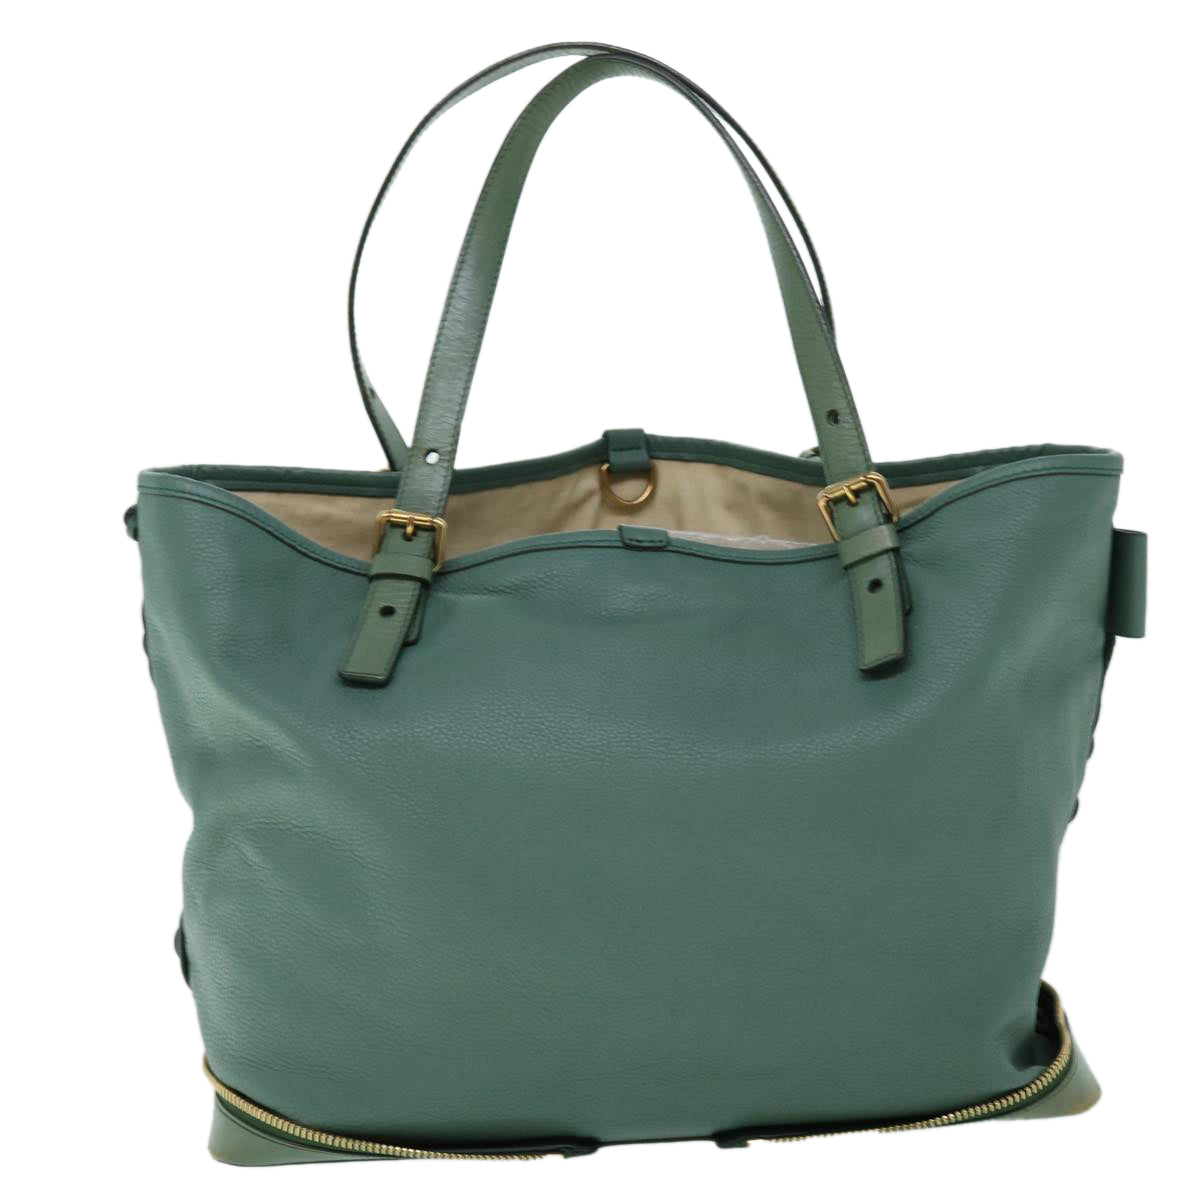 Chloe Tote Bag Leather Green Auth bs8301 - 0